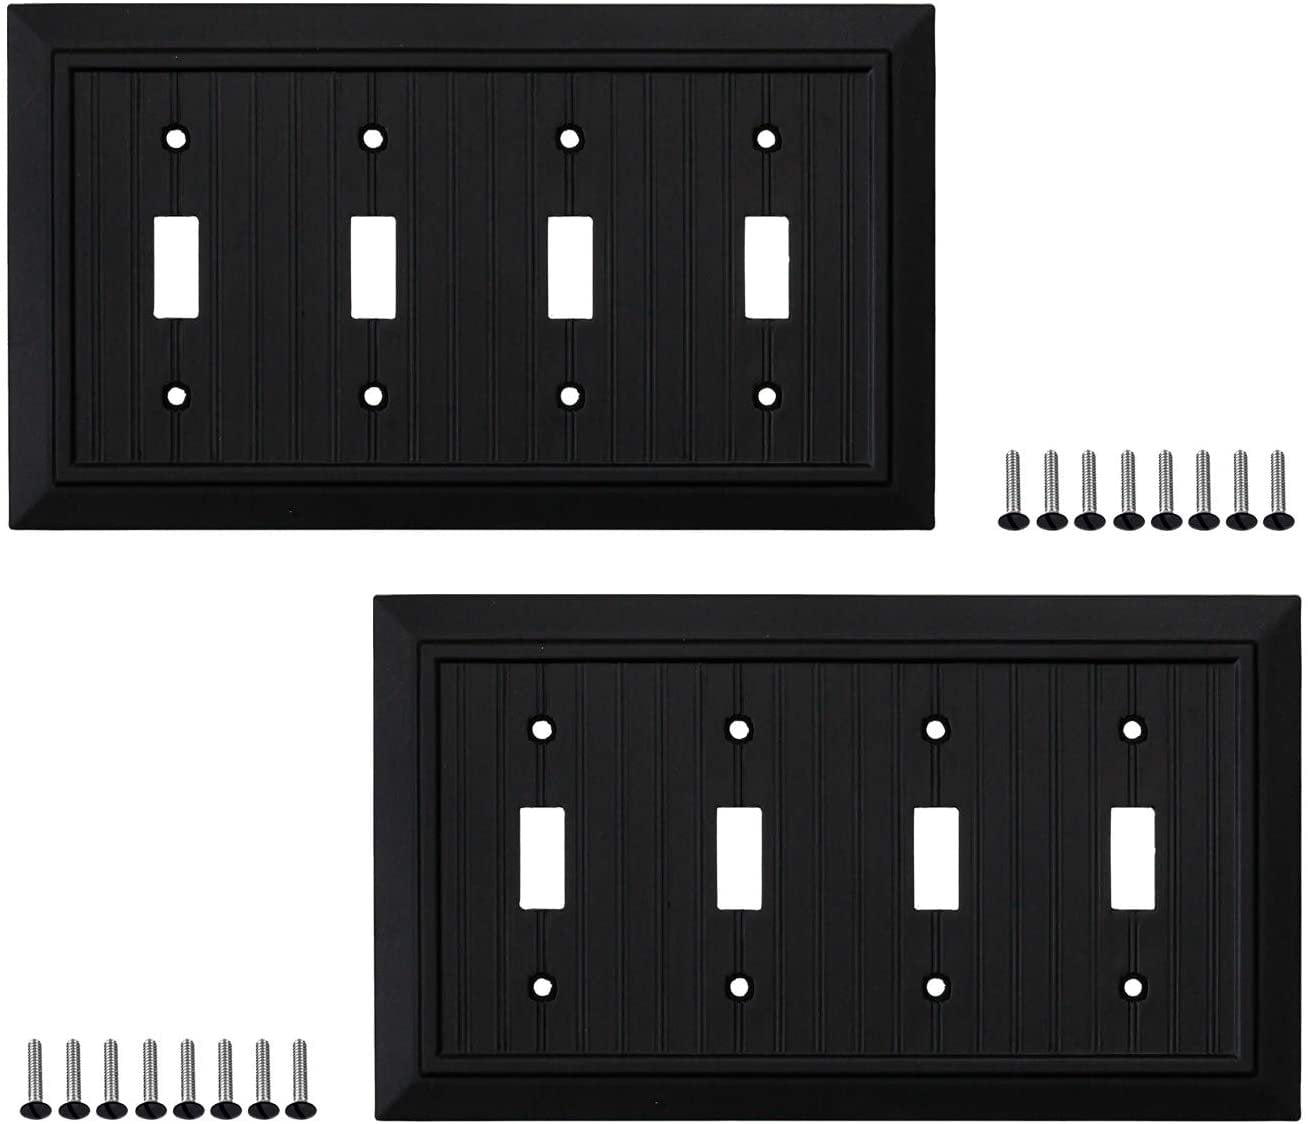 Electric Outlet and Switch Covers| Style: 1 Gang Blank 4 Pack SleekLighting Blank Wall plates Decorative Bamboo Classic Beadboard Black Finish 